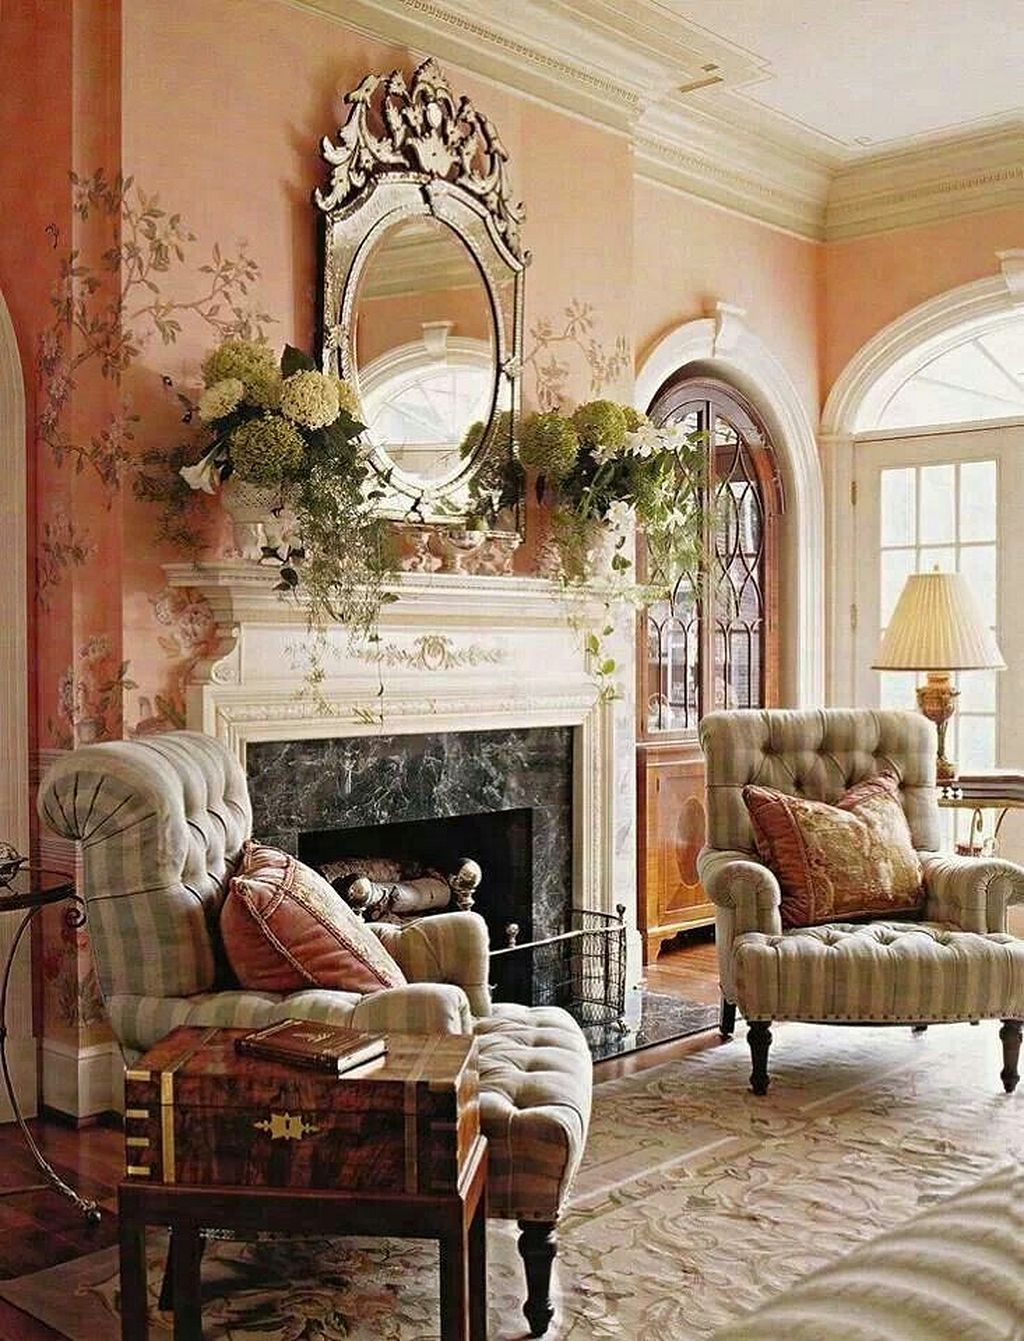 18 Images of English Country Home Decor Ideas - Decor Inspiration